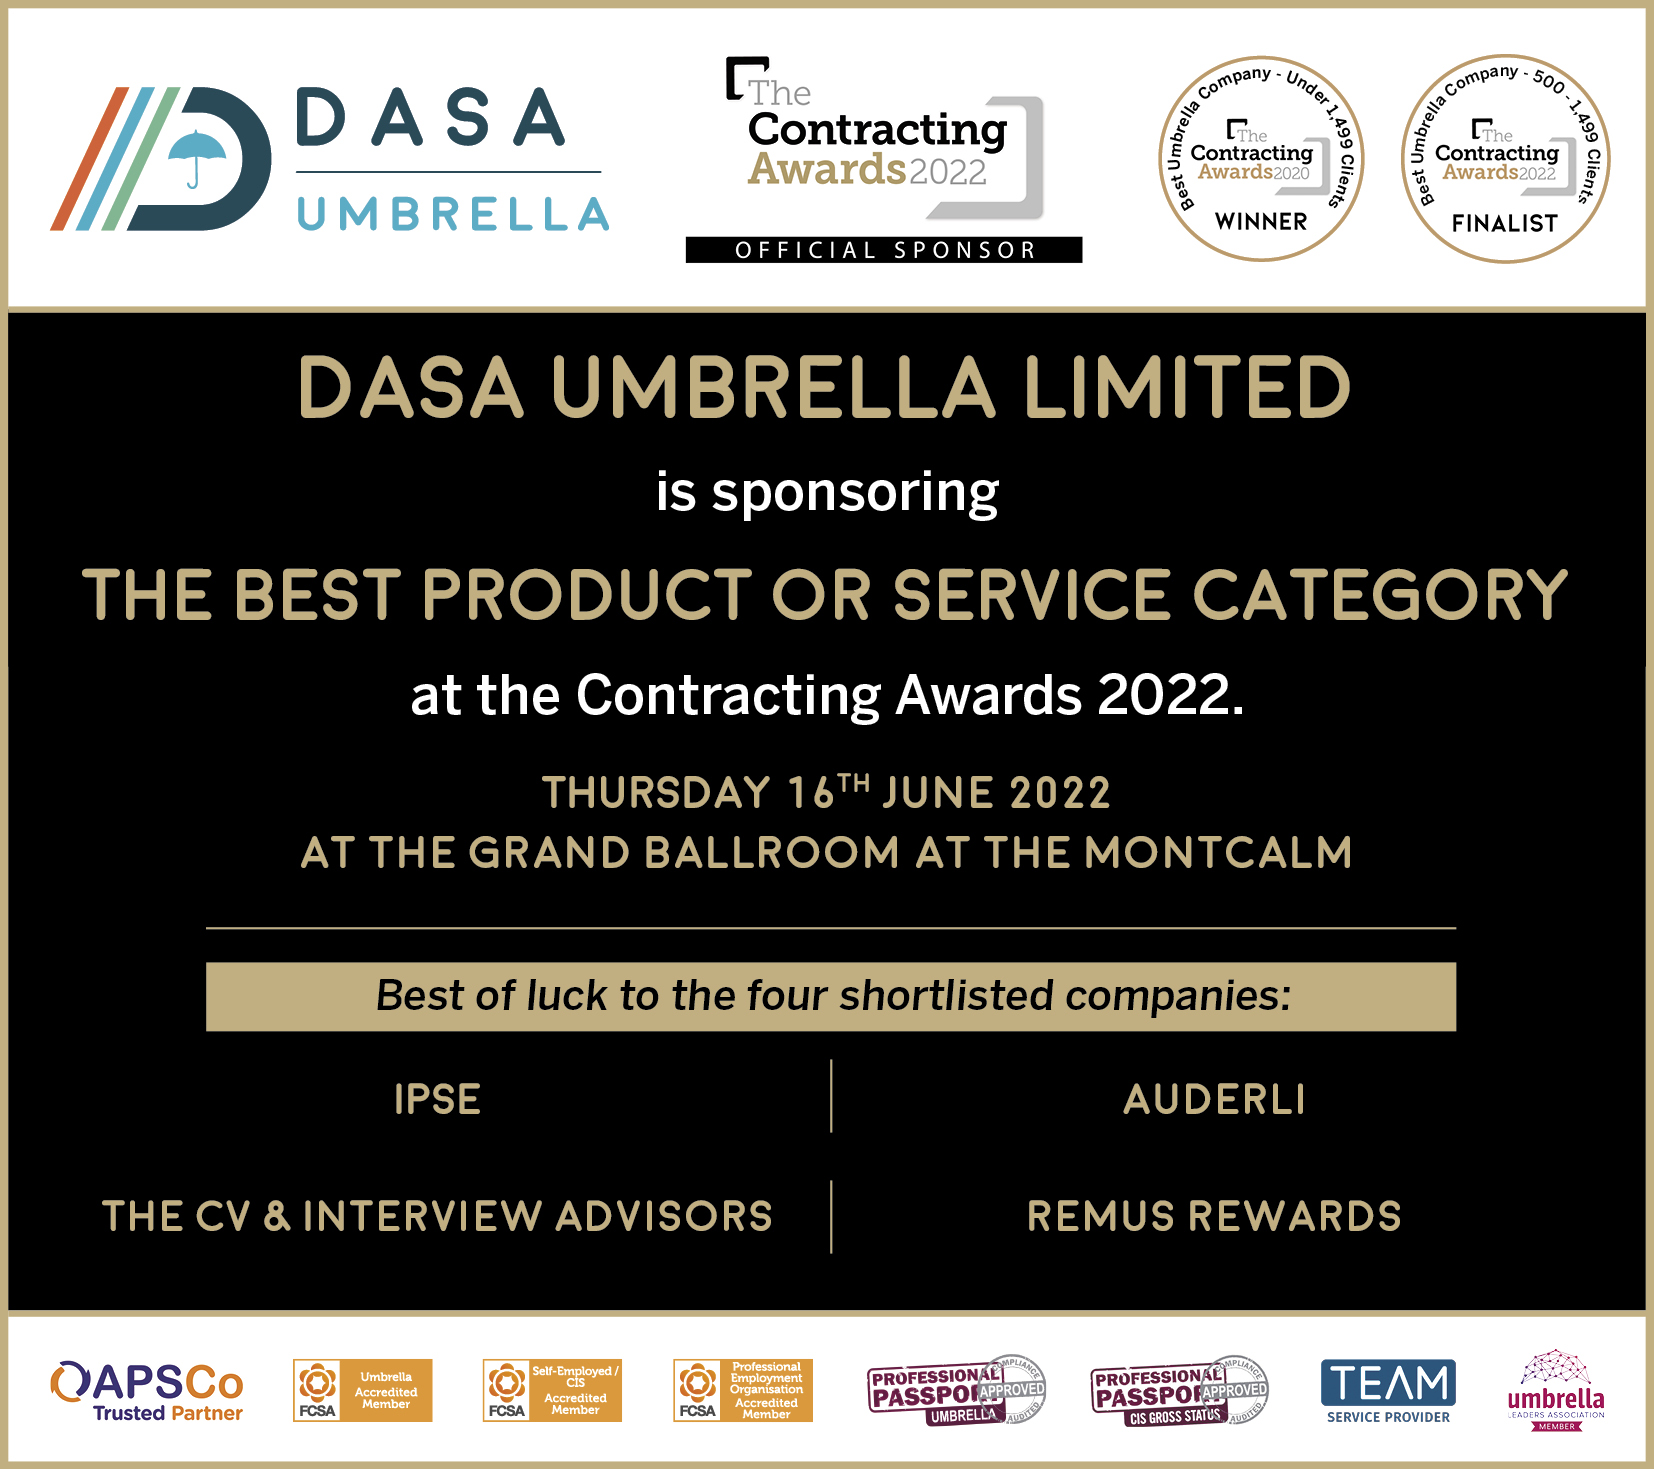 DASA SPONSORS BEST PRODUCT OR SERVICE CATEGORY AT THE CONTRACTING AWARDS 2020